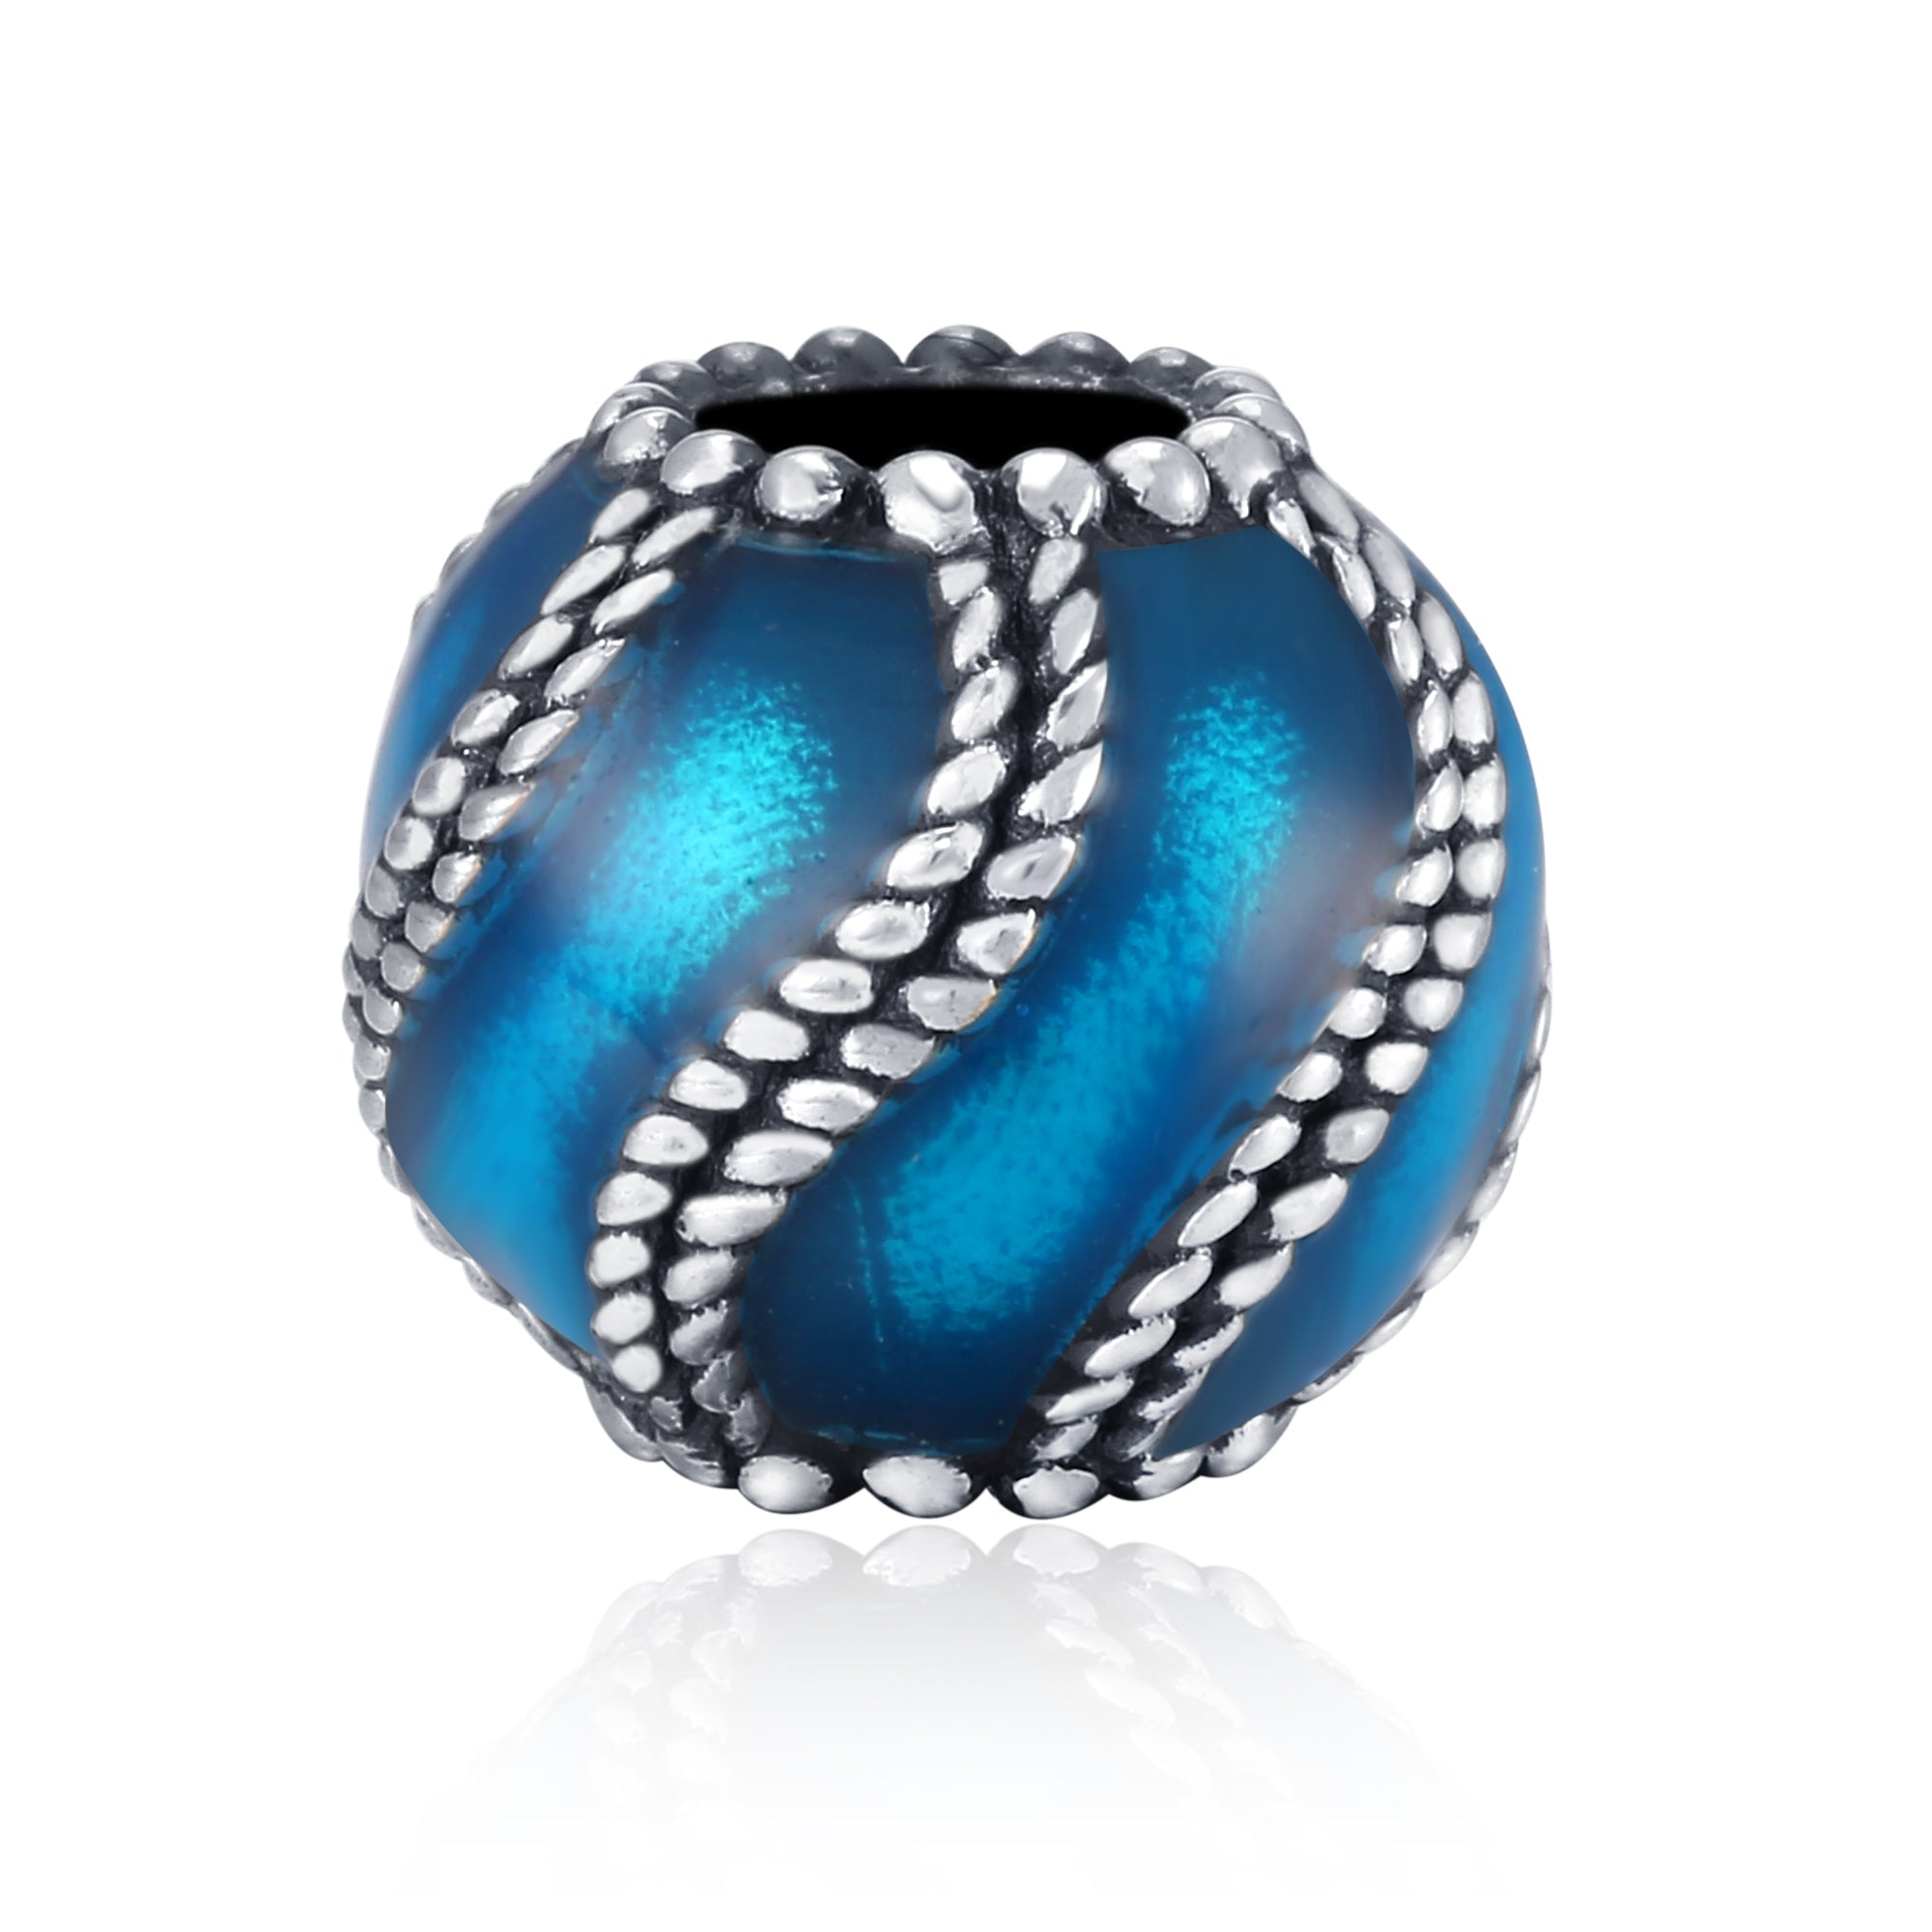 Blue Swirls Charm Galaxy Blue Ball Beads Decorated Silver Charms